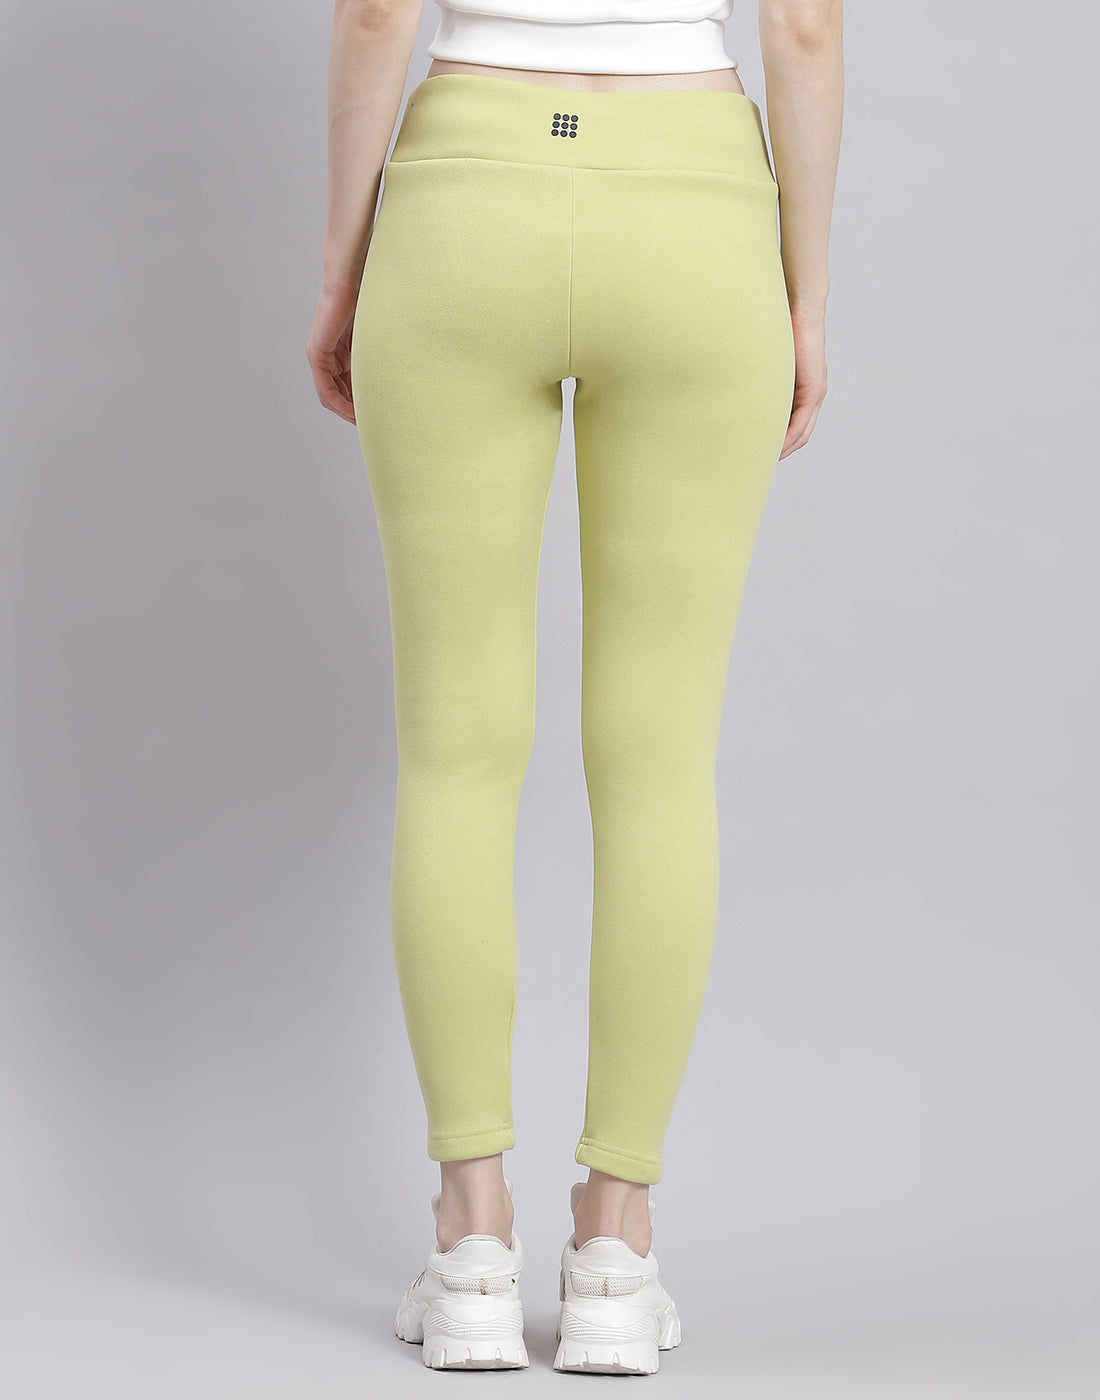 Soft Knit High Waisted Leggings - Neon Yellow